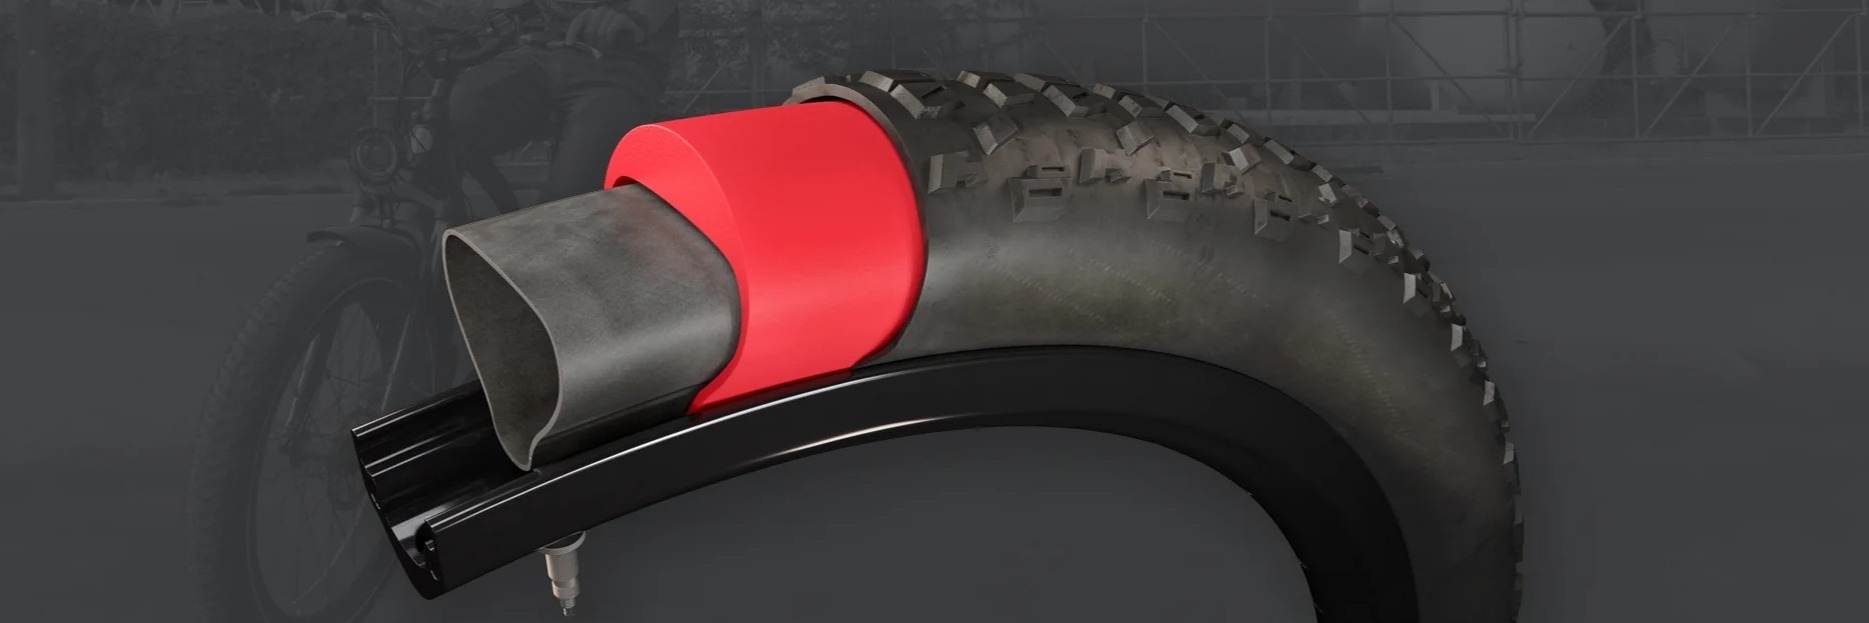 Tannus Armour and airless tire protection